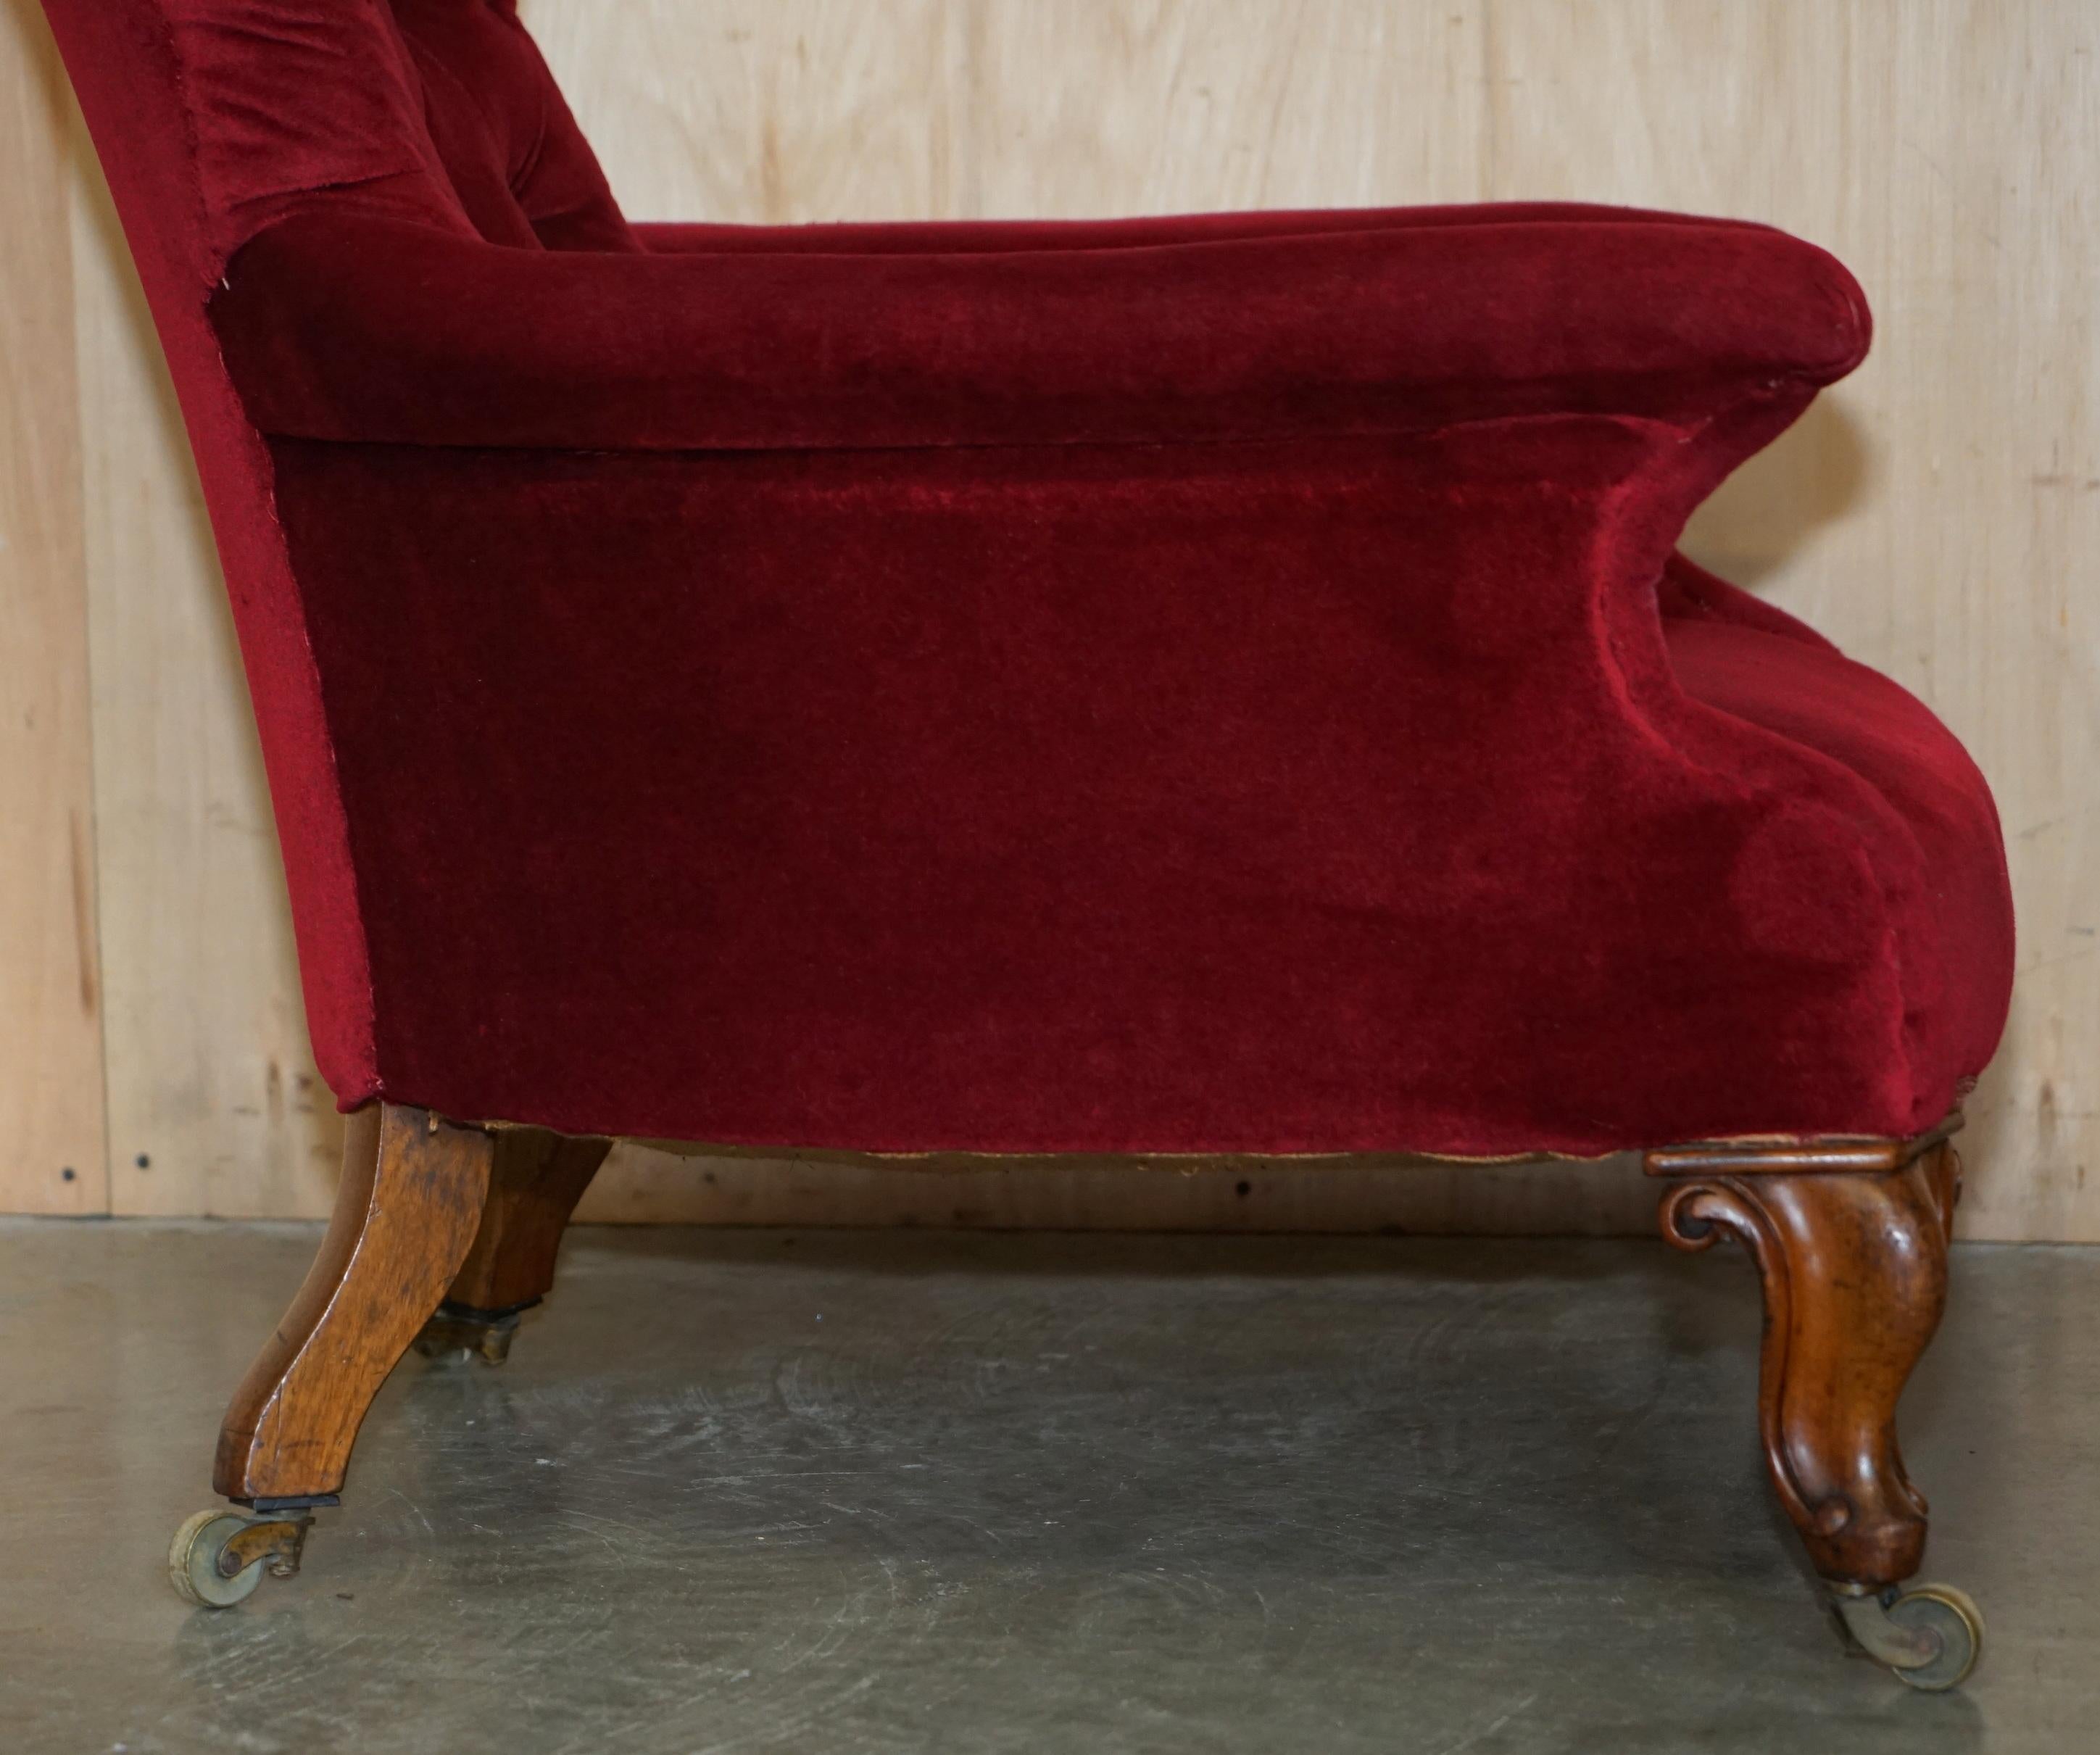 EXQUISITE ANTIQUE WILLIAM IV 1830 CHESTERFIELD TUFTED WALNUT LIBRARY ARMCHAiR For Sale 5